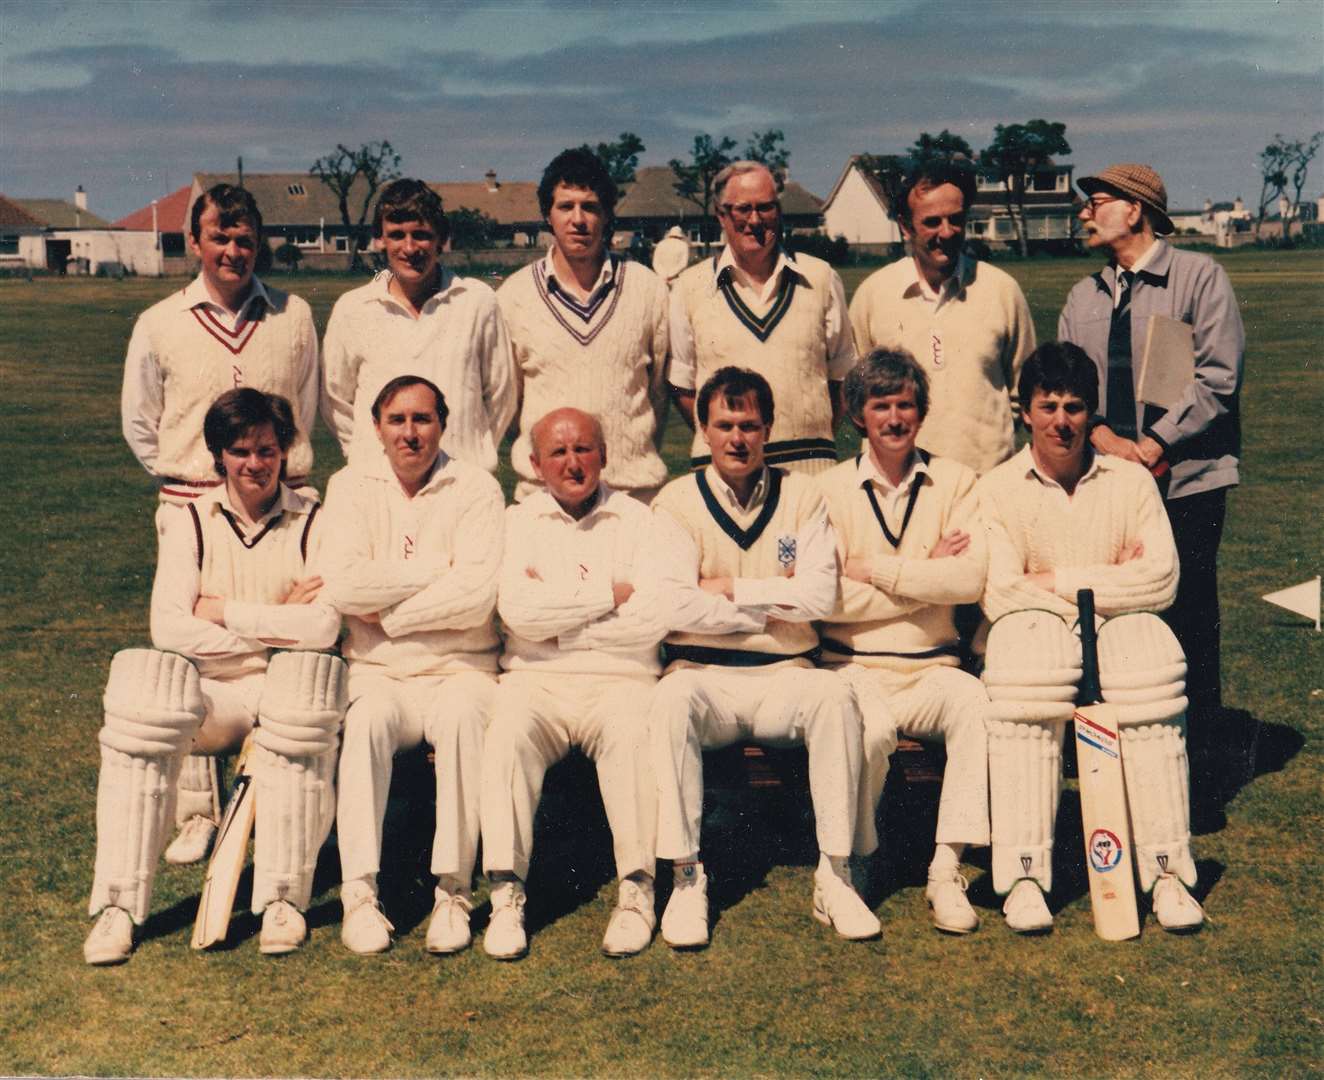 The Northern Counties Cricket Club won the Senior Knock-Out Cup again in 1986. Back: W.G.A. Jaffrey, G. Scott, S. Bignell, B. Wilson, W.J. Dishington, G. Kitcher (scorer); front: N. Gallacher, I. Rankin, A.P. Borrie, K.D. McCorquodale, R.A. Miller, R. Munro.